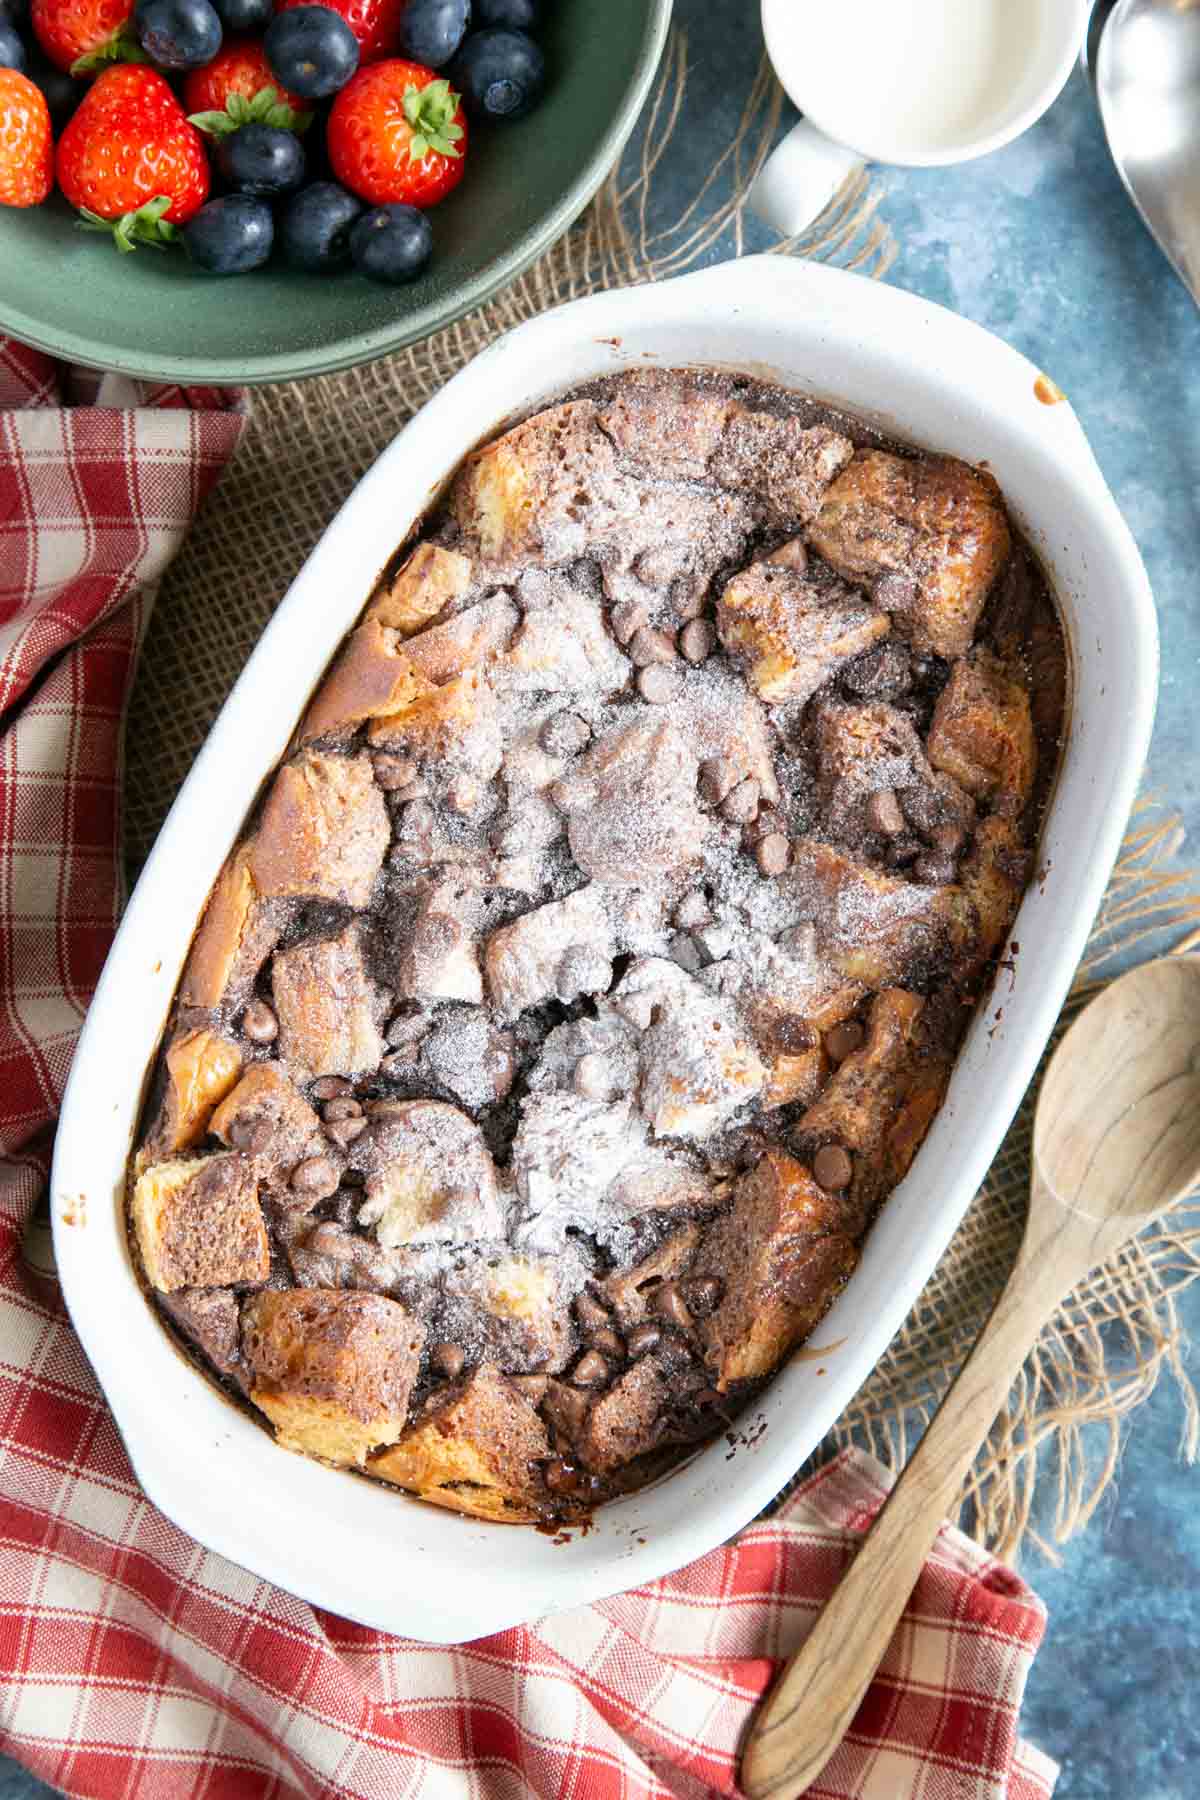 A dish of chocolate hazelnut bread and butter pudding, dusted with icing sugar with a bowl of berries on the side.